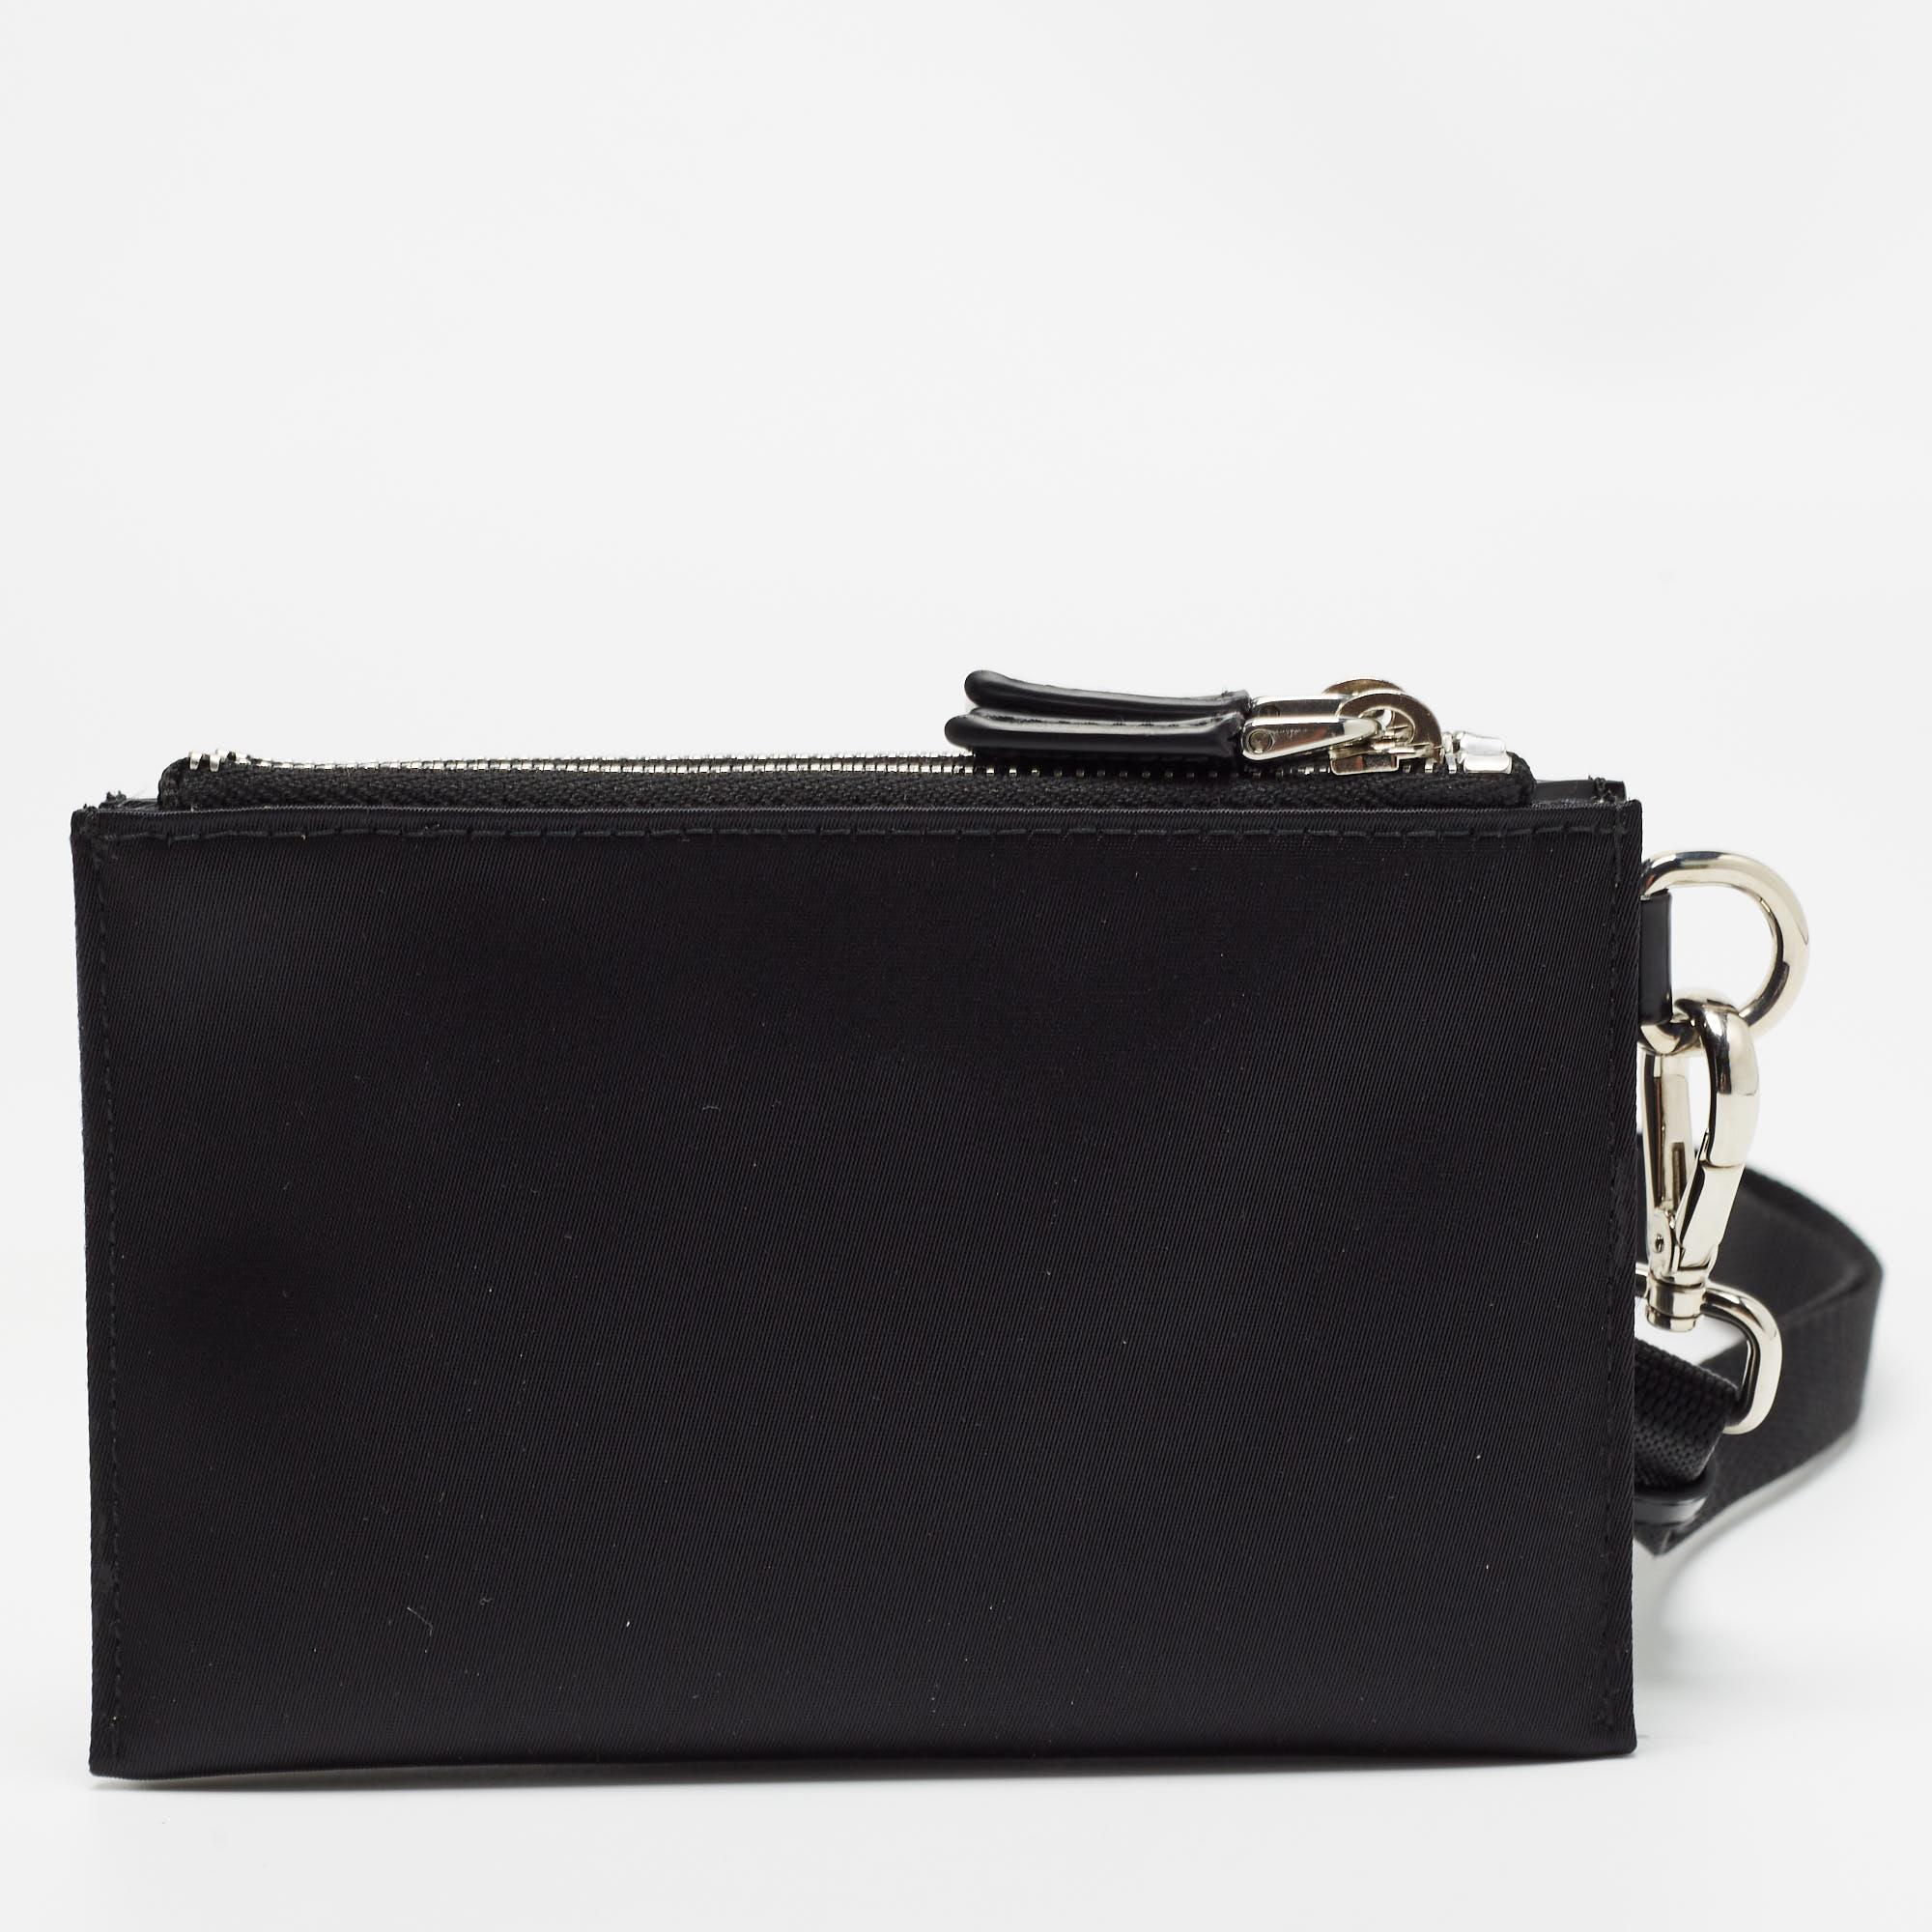 Easy to hold and perfect for housing your little essentials, this Prada pouch is a must-have. It is made of leather & nylon and elevated with the logo on the front.

Includes: Original Box, Info Booklet